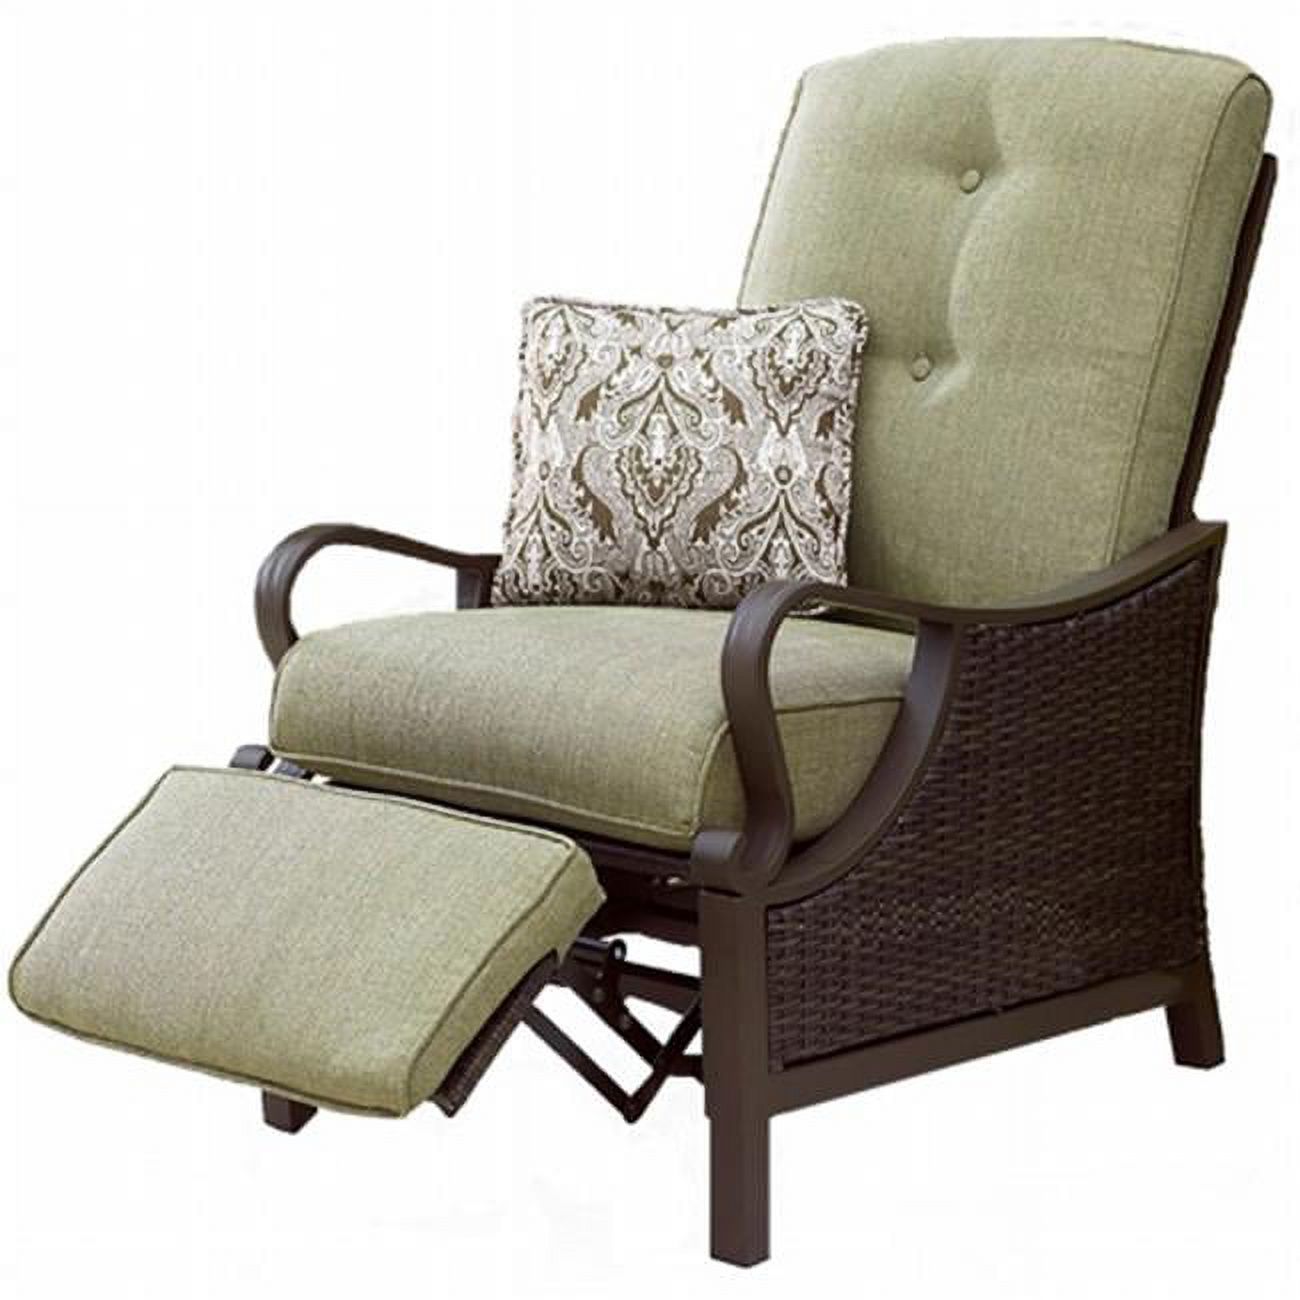 Ventura Luxury Recliner Patio Chair with Pillow - image 1 of 1